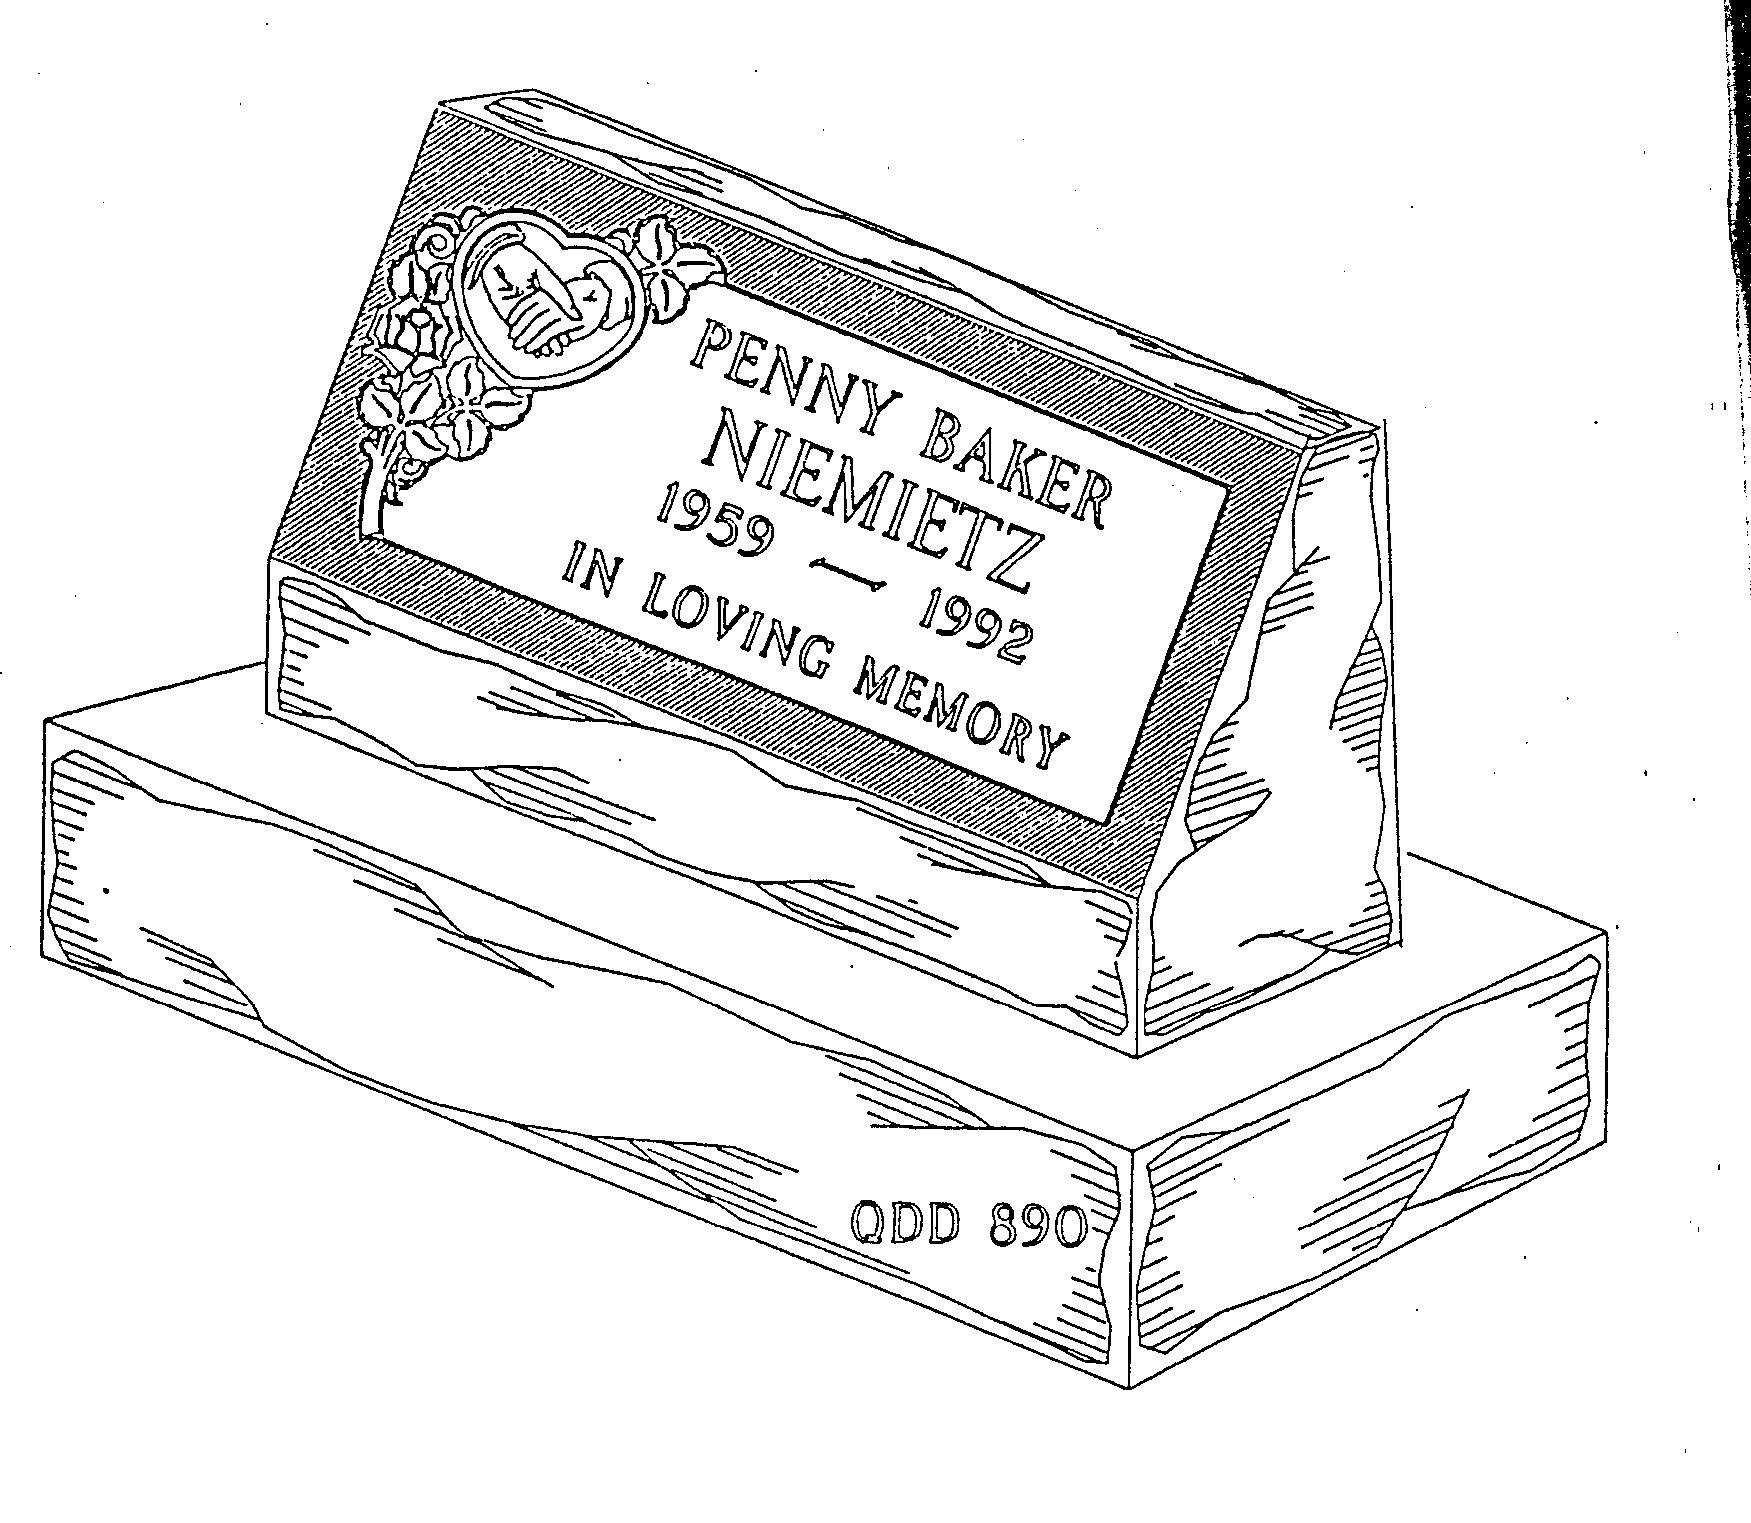 a black and white drawing of a gravestone for penny baker niemetz